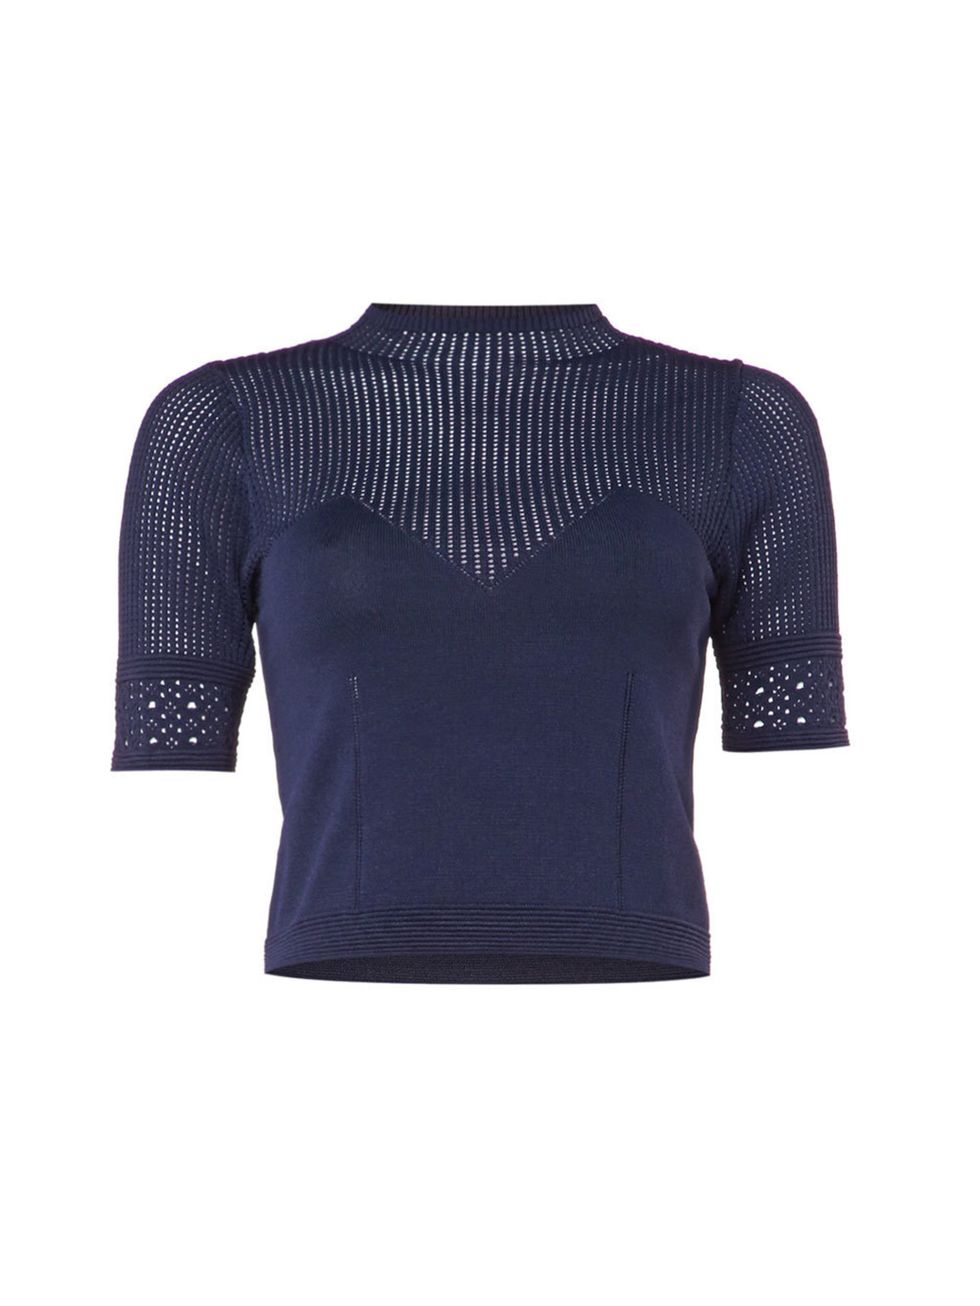 Product, Sleeve, White, Pattern, Electric blue, Black, Sweater, Active shirt, Pattern, 